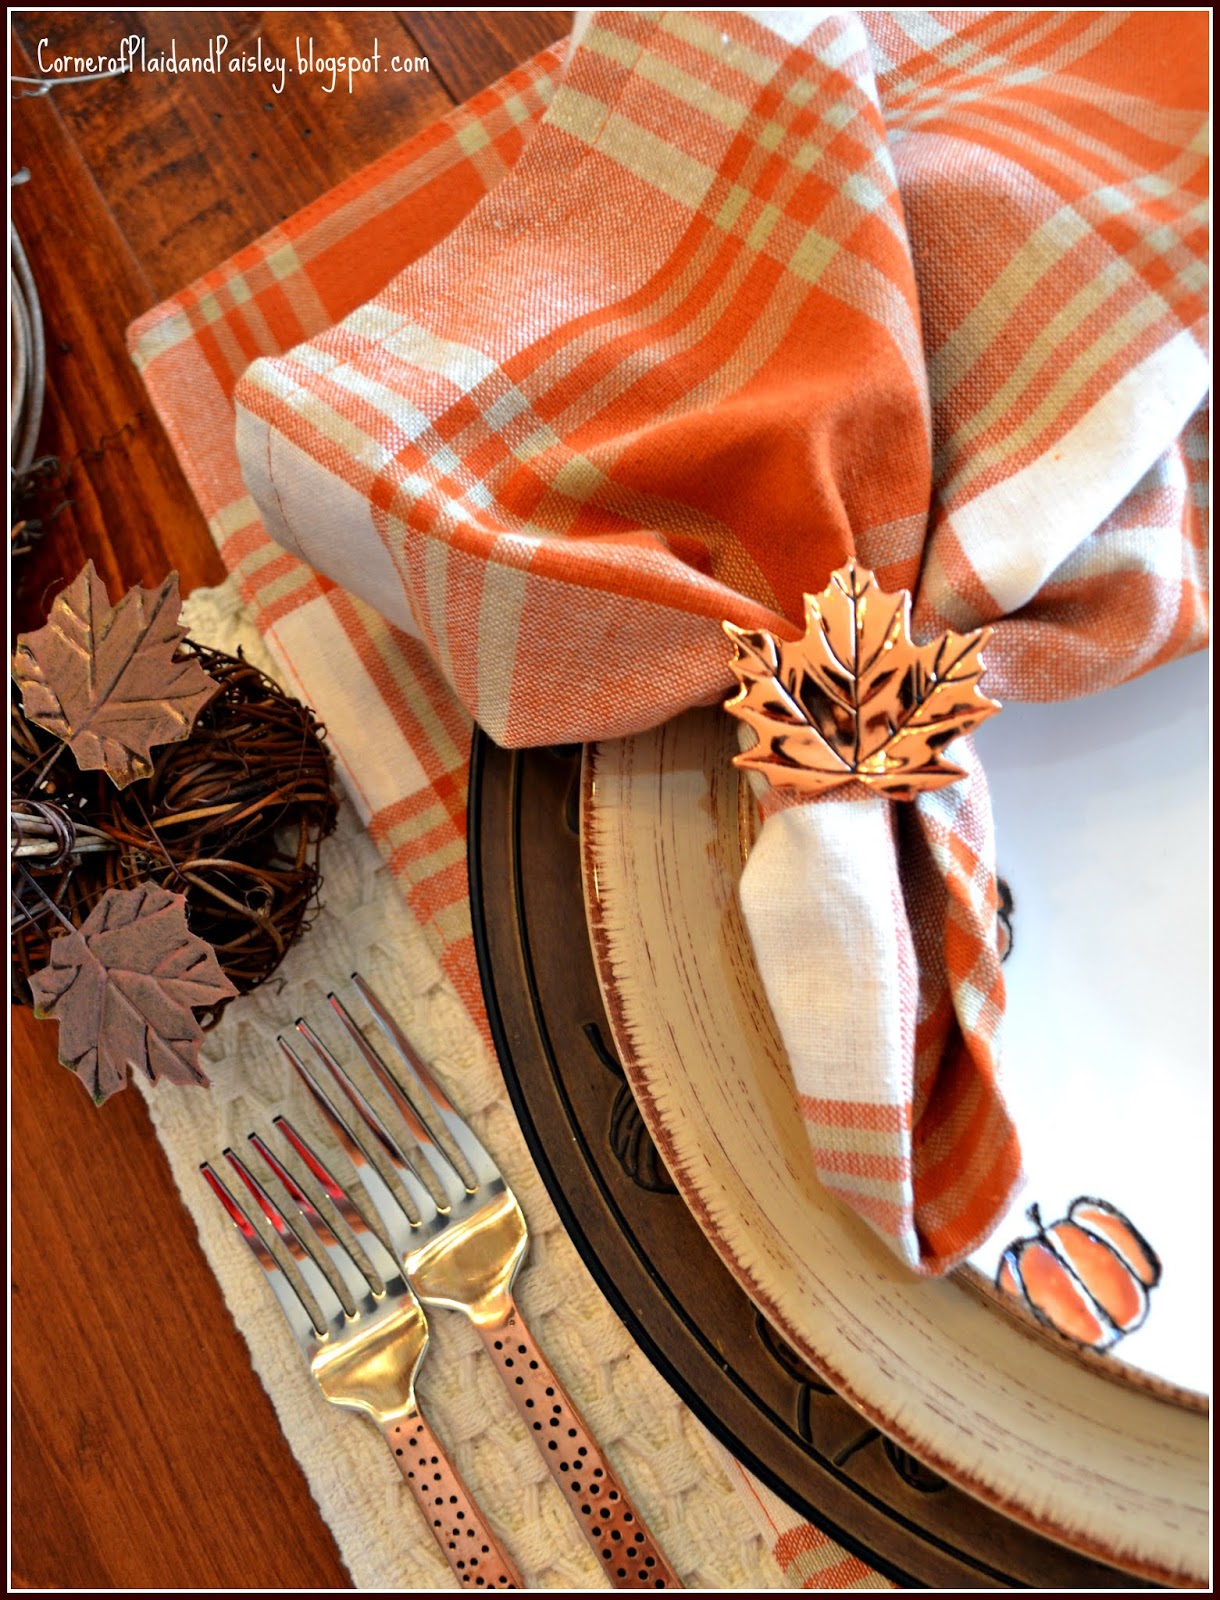 Bee Tablescape and Blog Hop - Corner of Plaid and Paisley